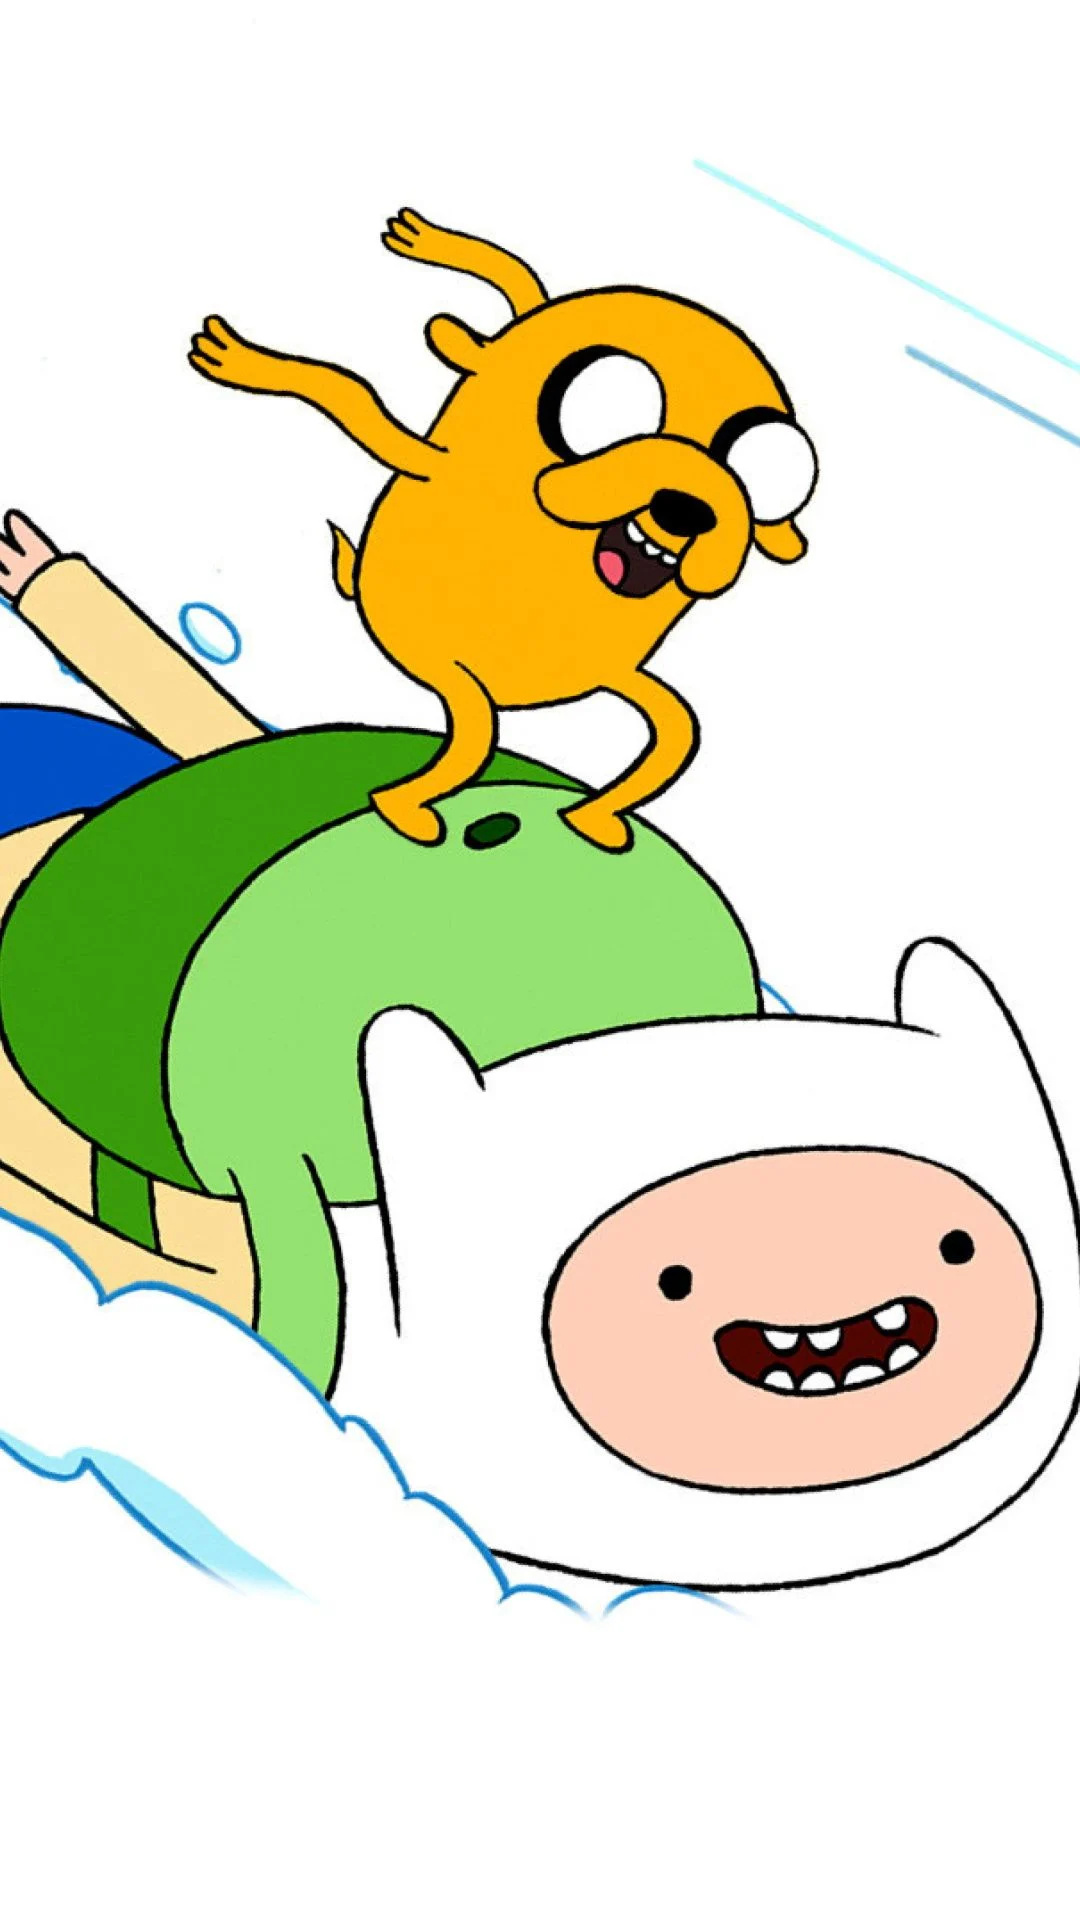 Finn and Jake wallpapers, Adventure Time backgrounds, Animated series, Cartoon characters, 1080x1920 Full HD Phone